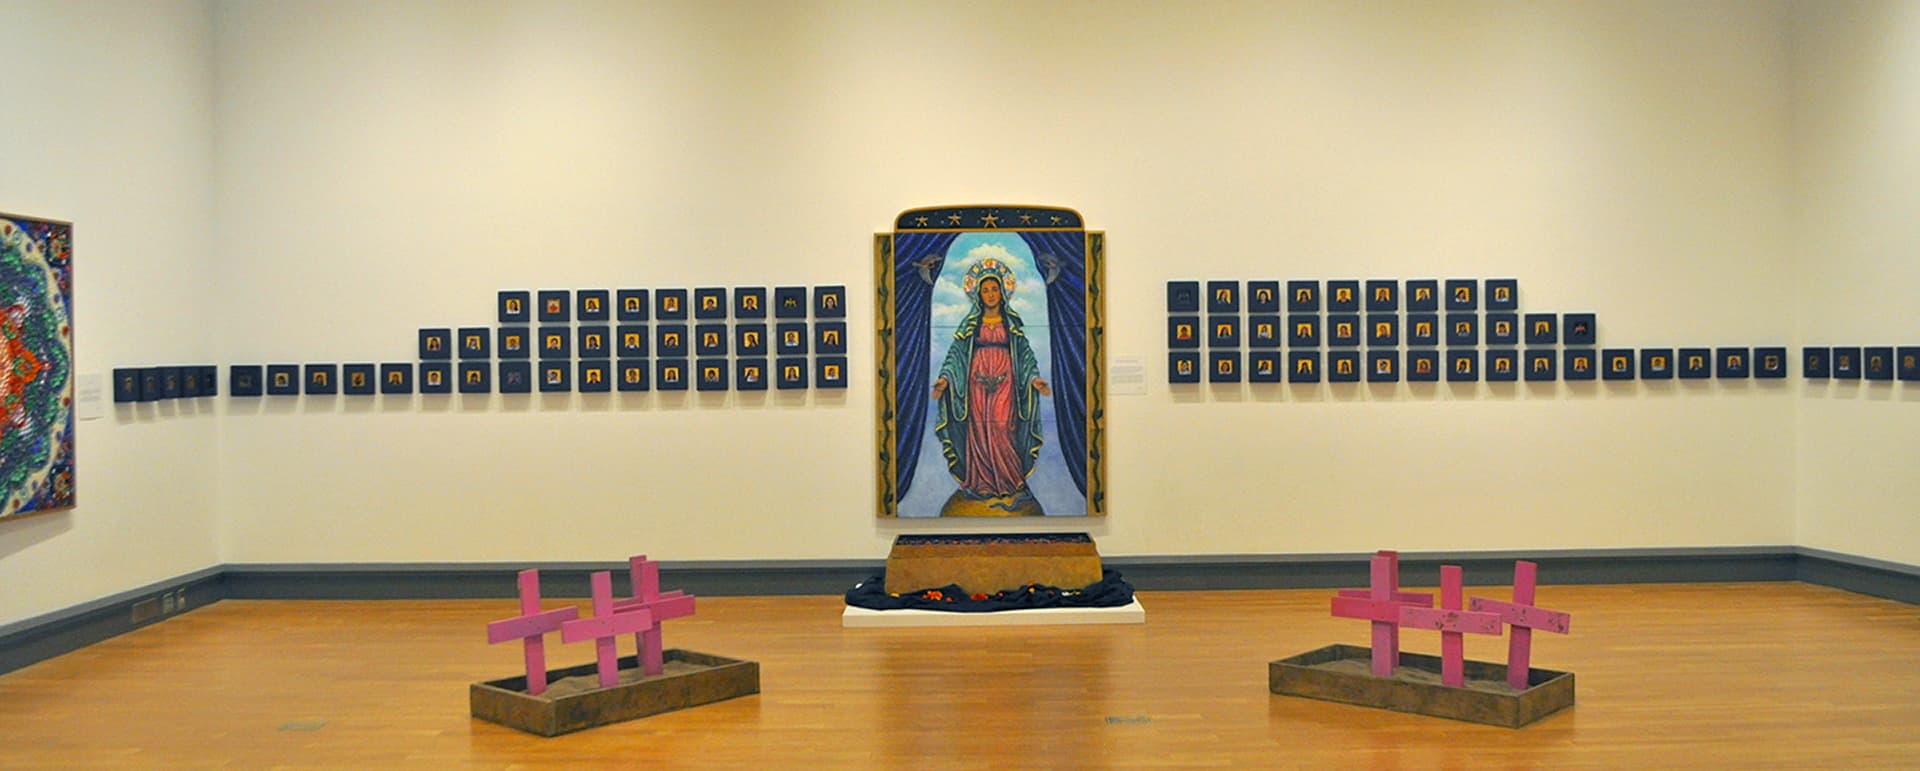 Installation view of Diane Kahlo’s Las Desaparecidas de Ciudad Juarez: Homage to the Missing and Murdered Girls of Juarez Mexico.  Image includes paintings, mixed media work, and sculptural pieces.